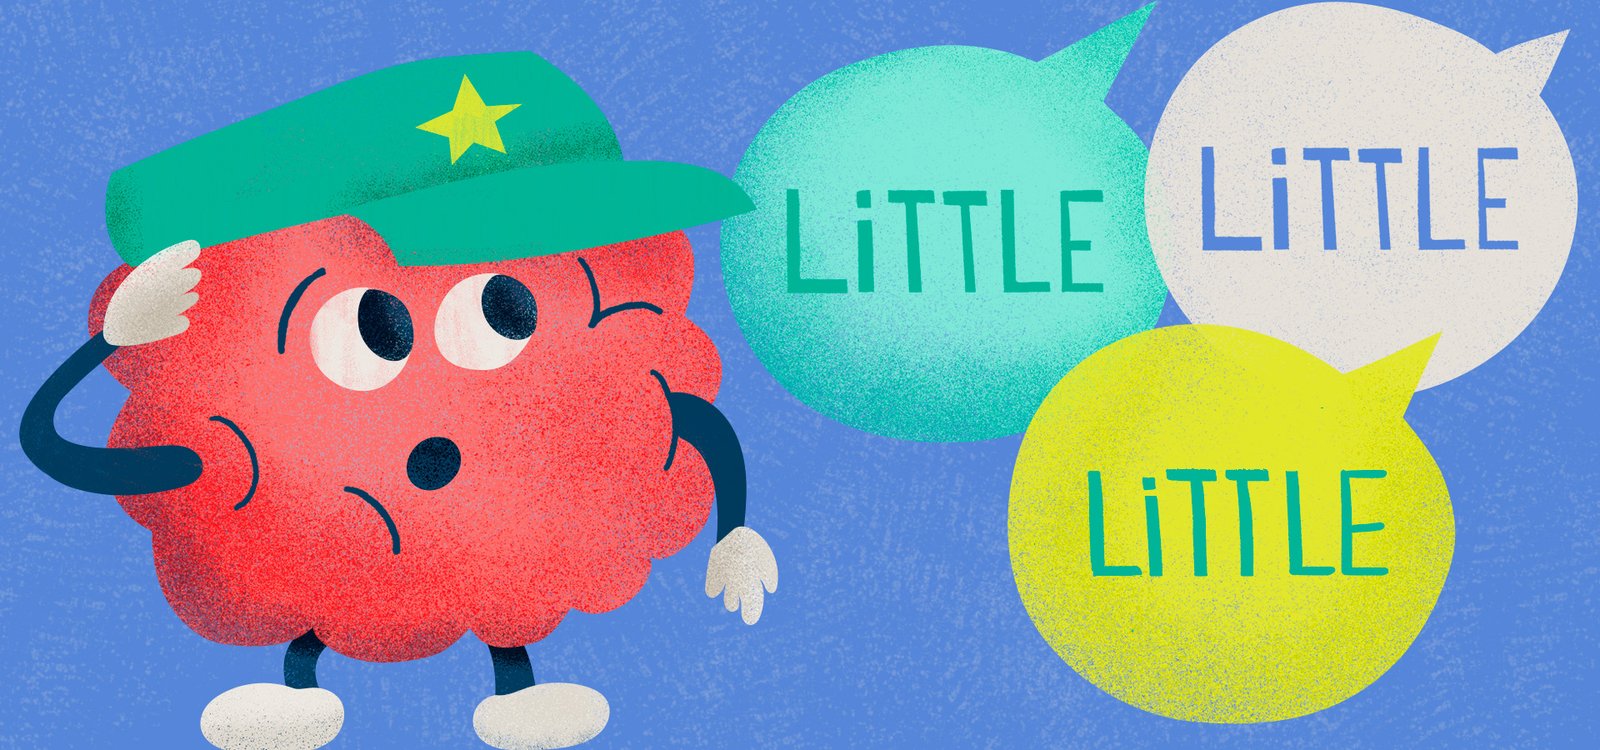 Cartoon brain with a soldier hat paying attention to word bubbles that say "little"